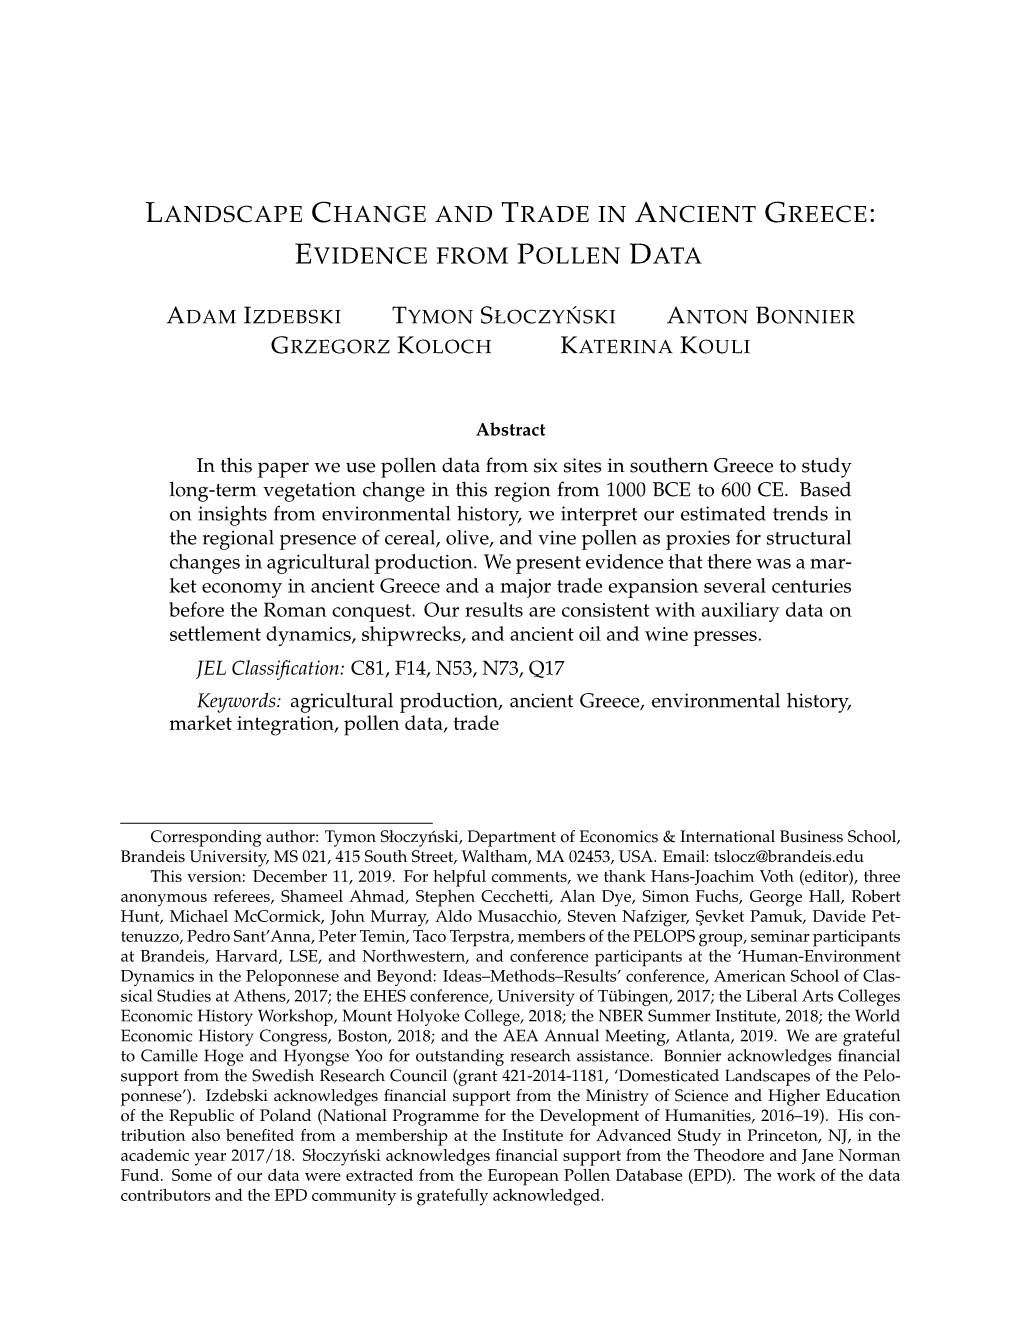 Landscape Change and Trade in Ancient Greece